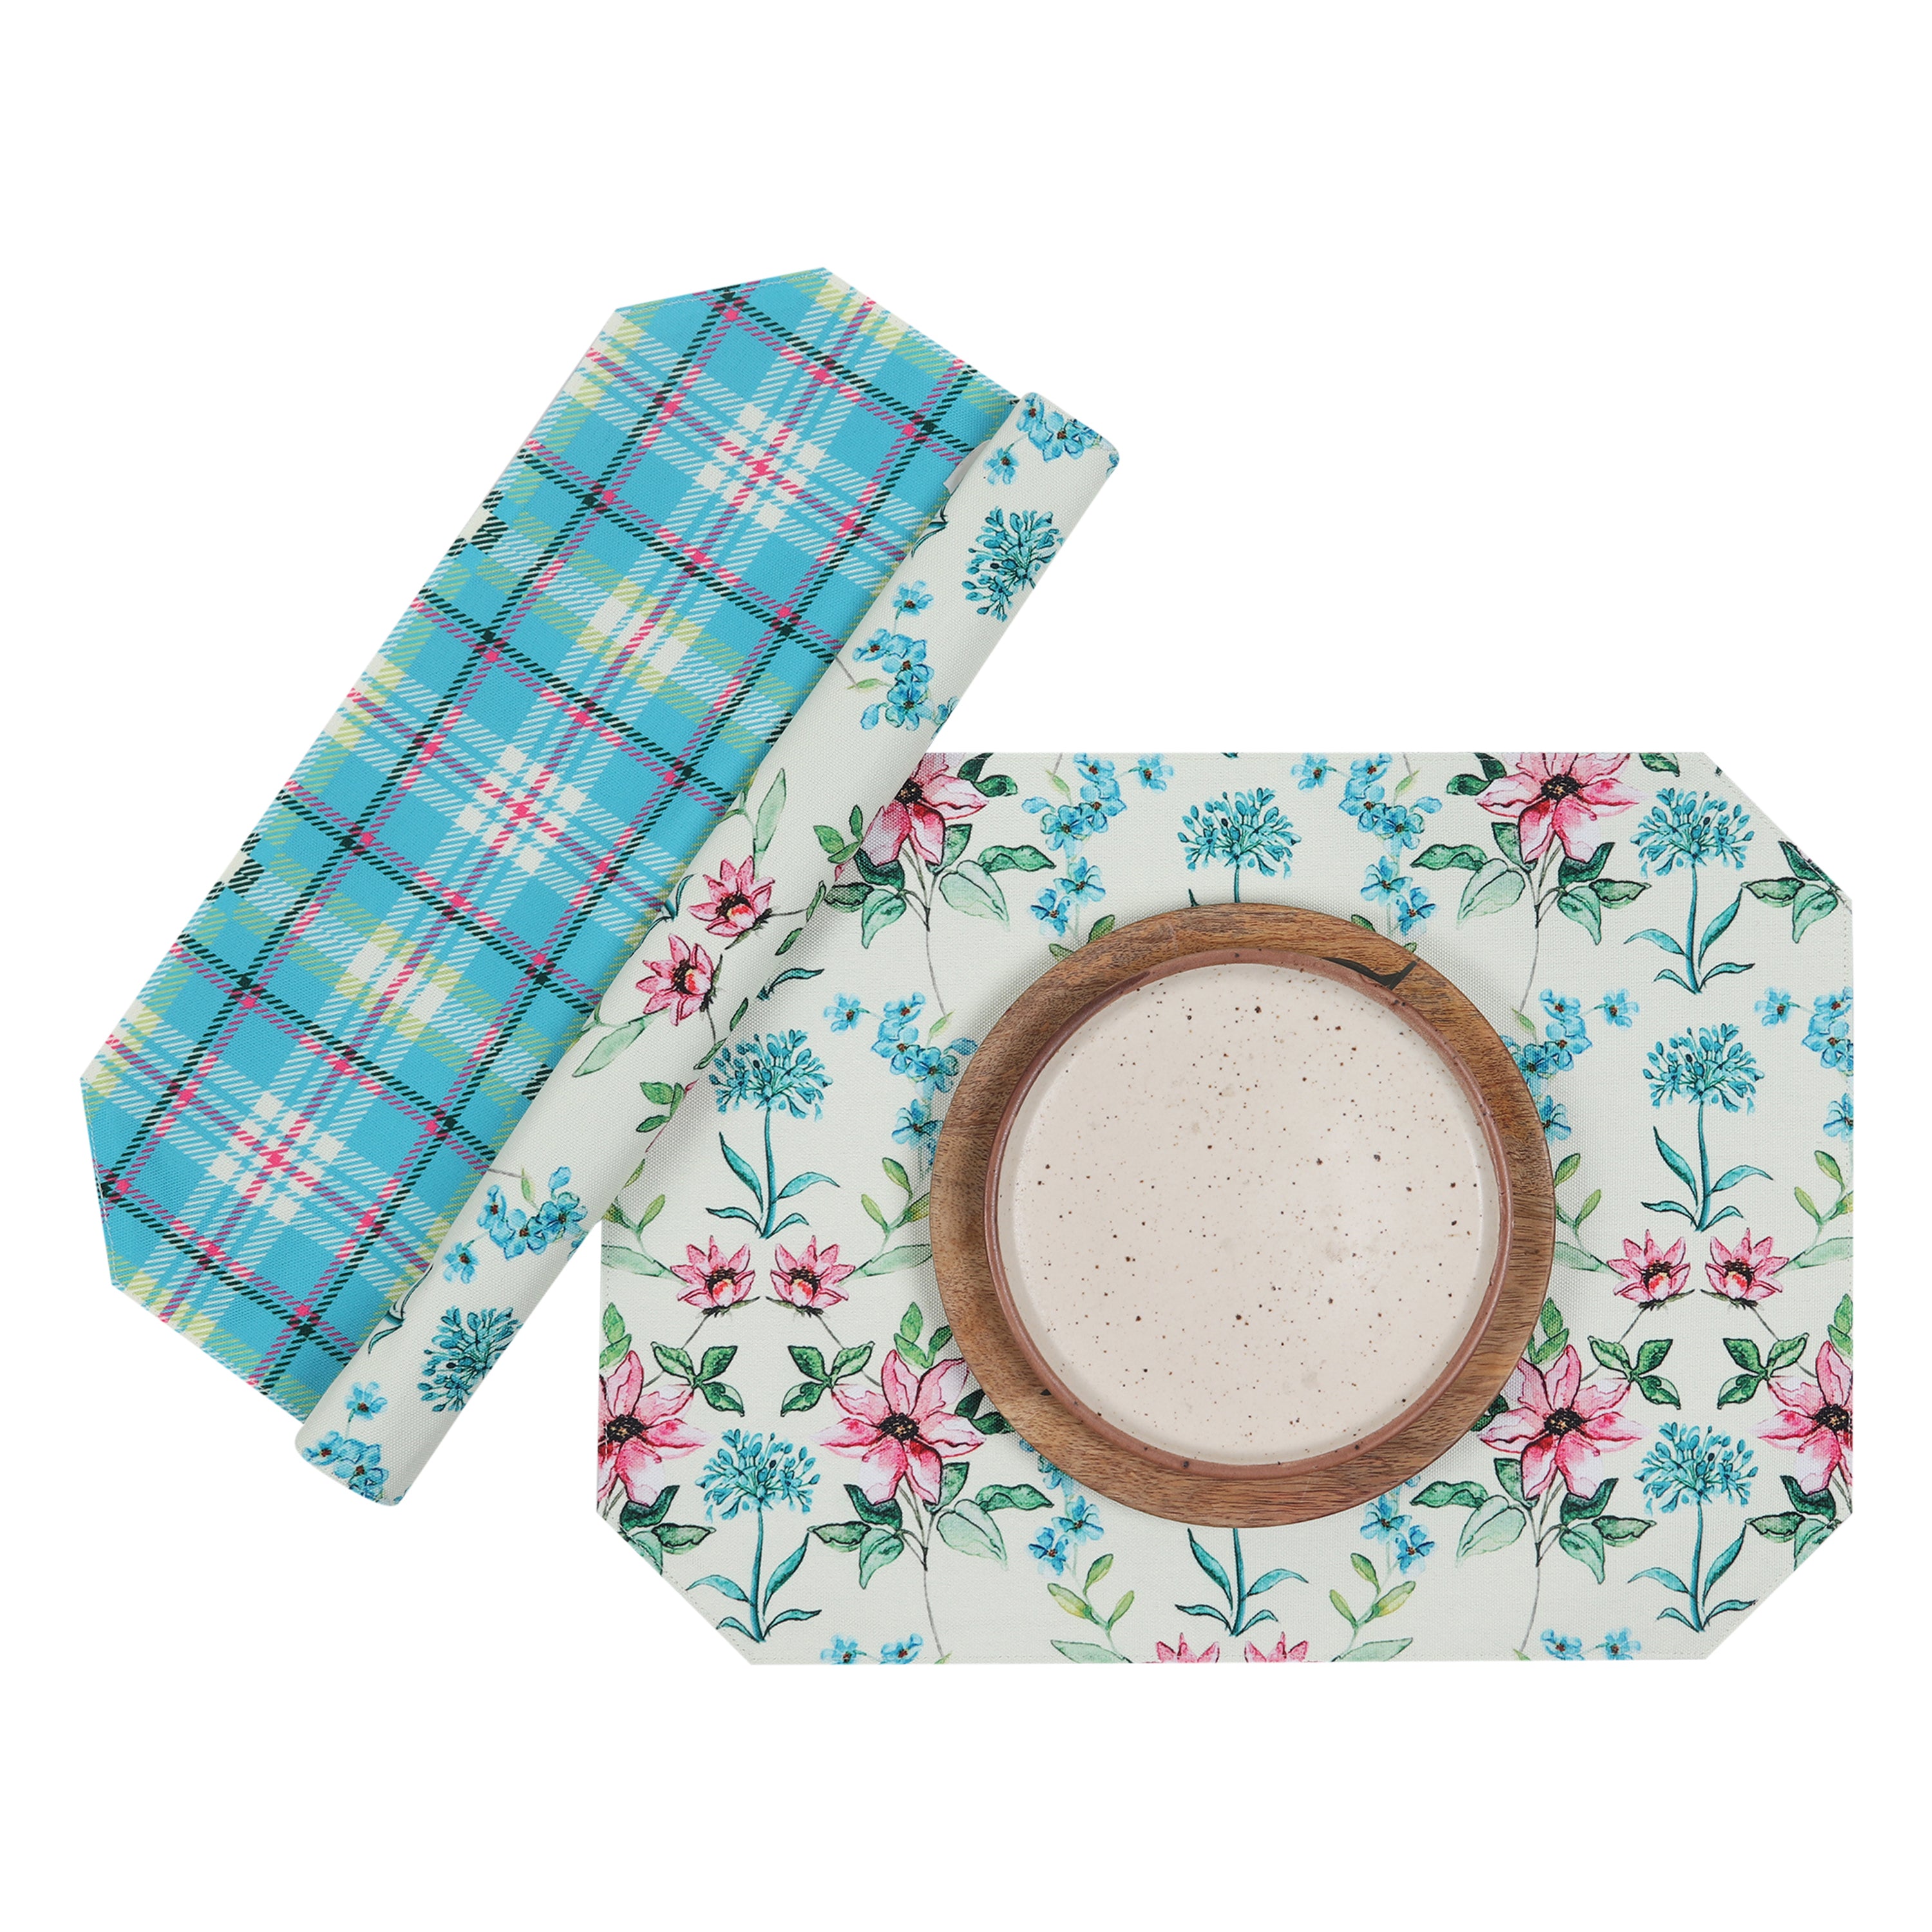 Fabric Placemats - Blooming Delights